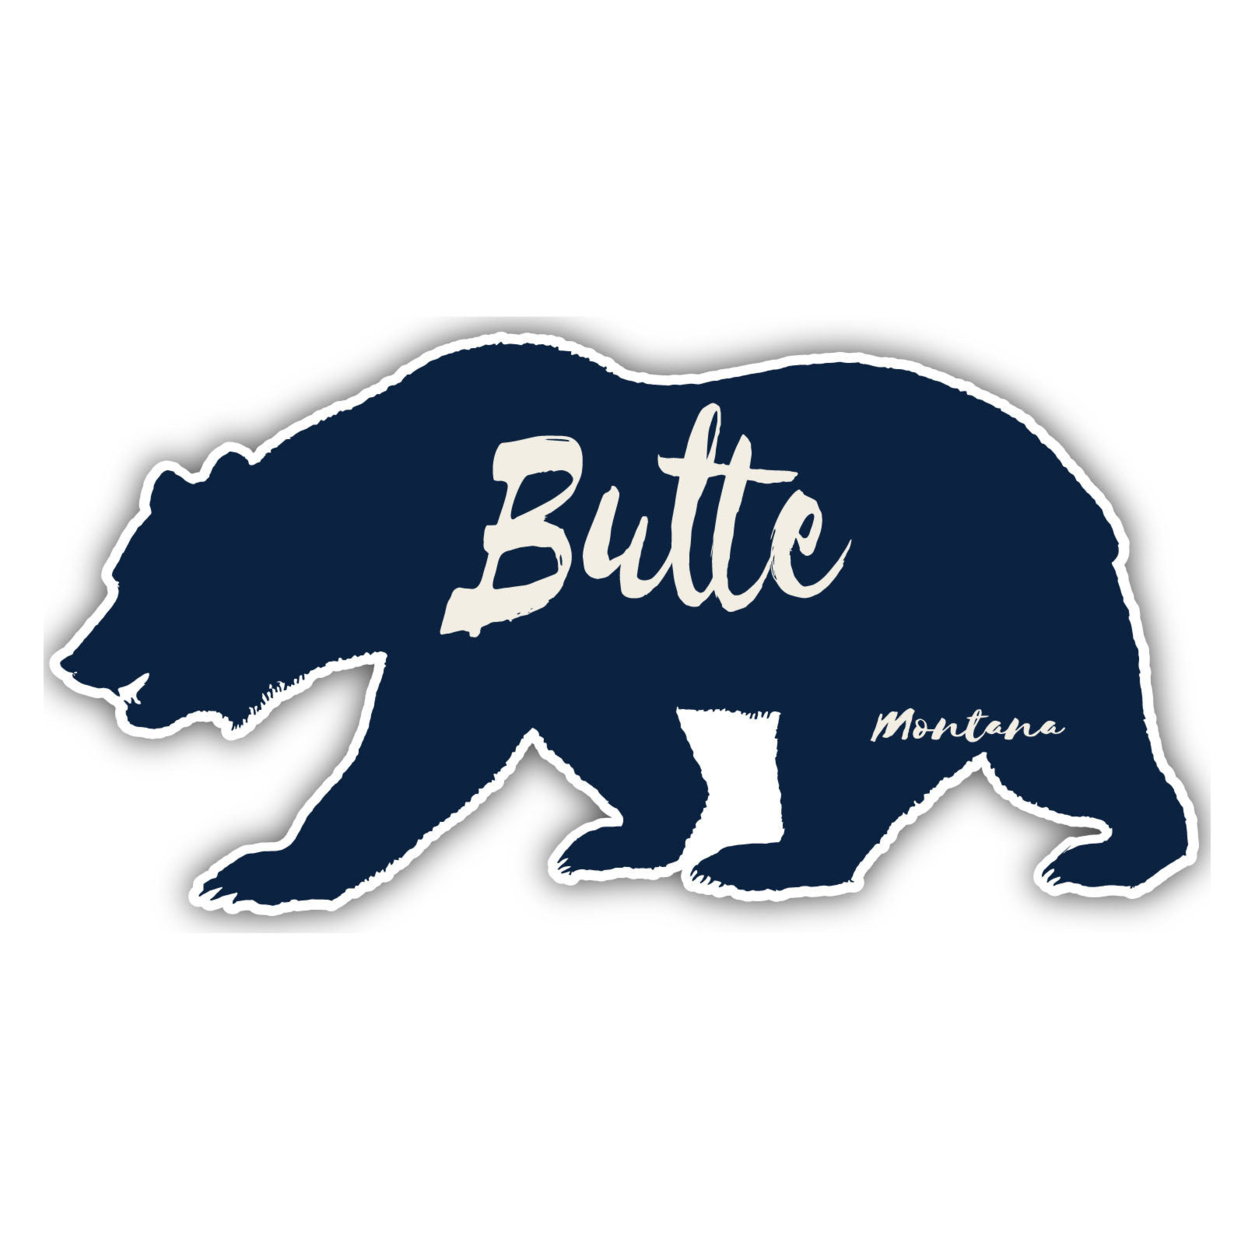 Butte Montana Souvenir Decorative Stickers (Choose Theme And Size) - 4-Pack, 8-Inch, Tent